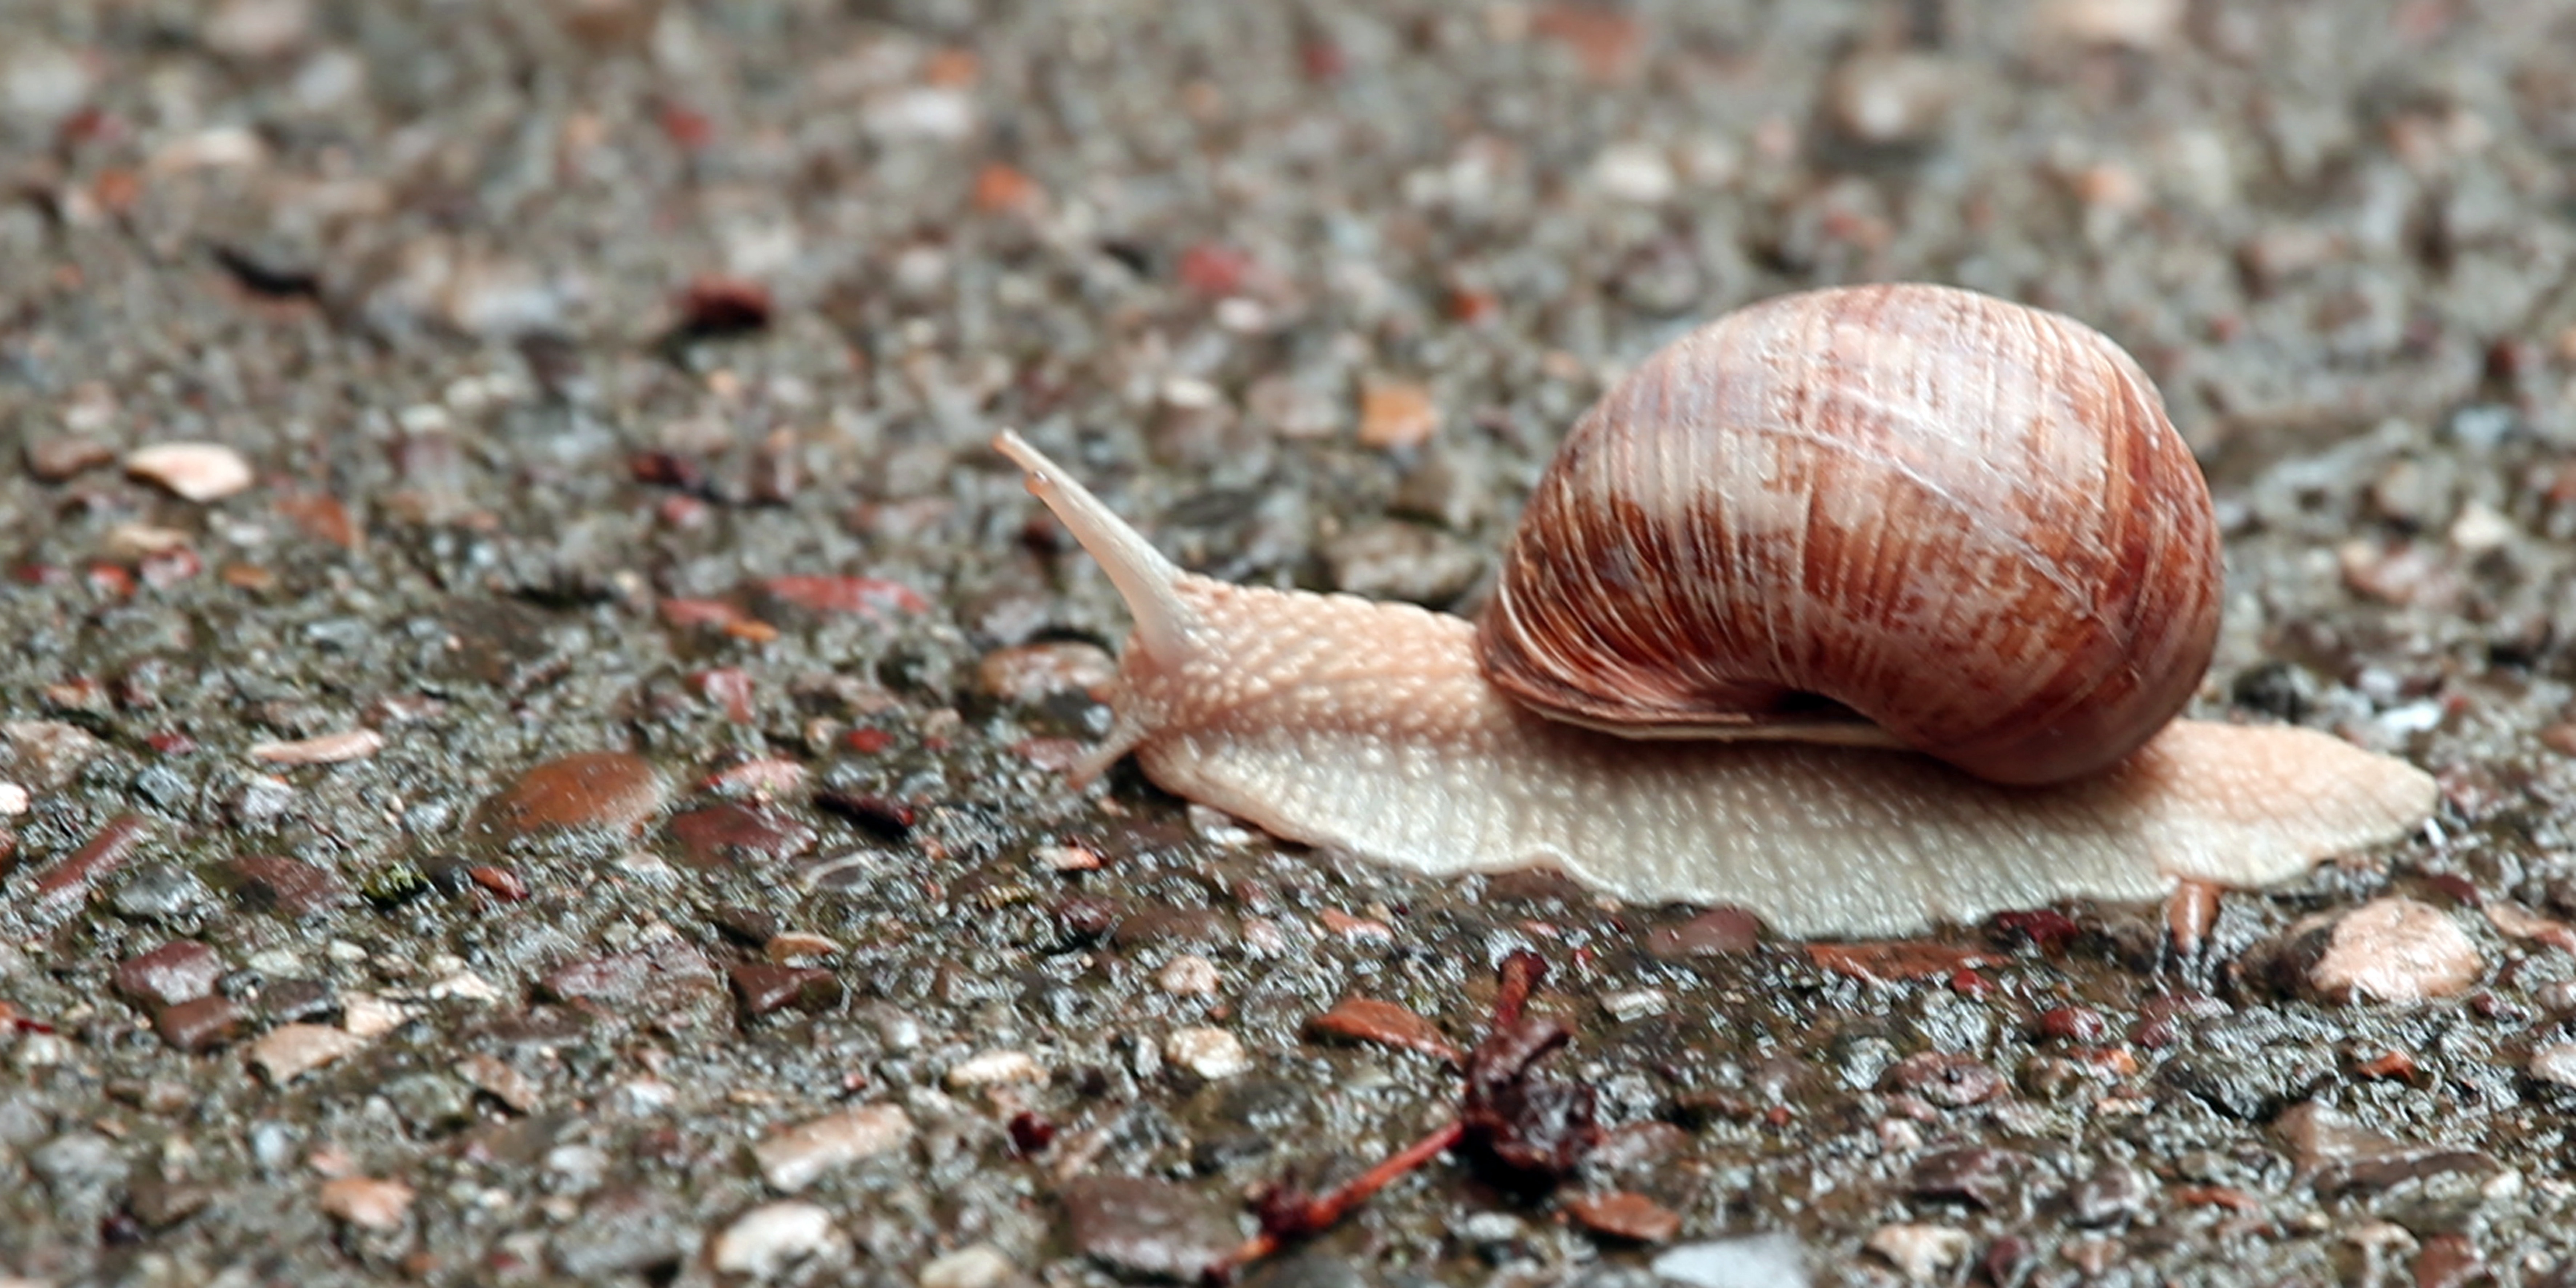 brown and white snail on gray soil